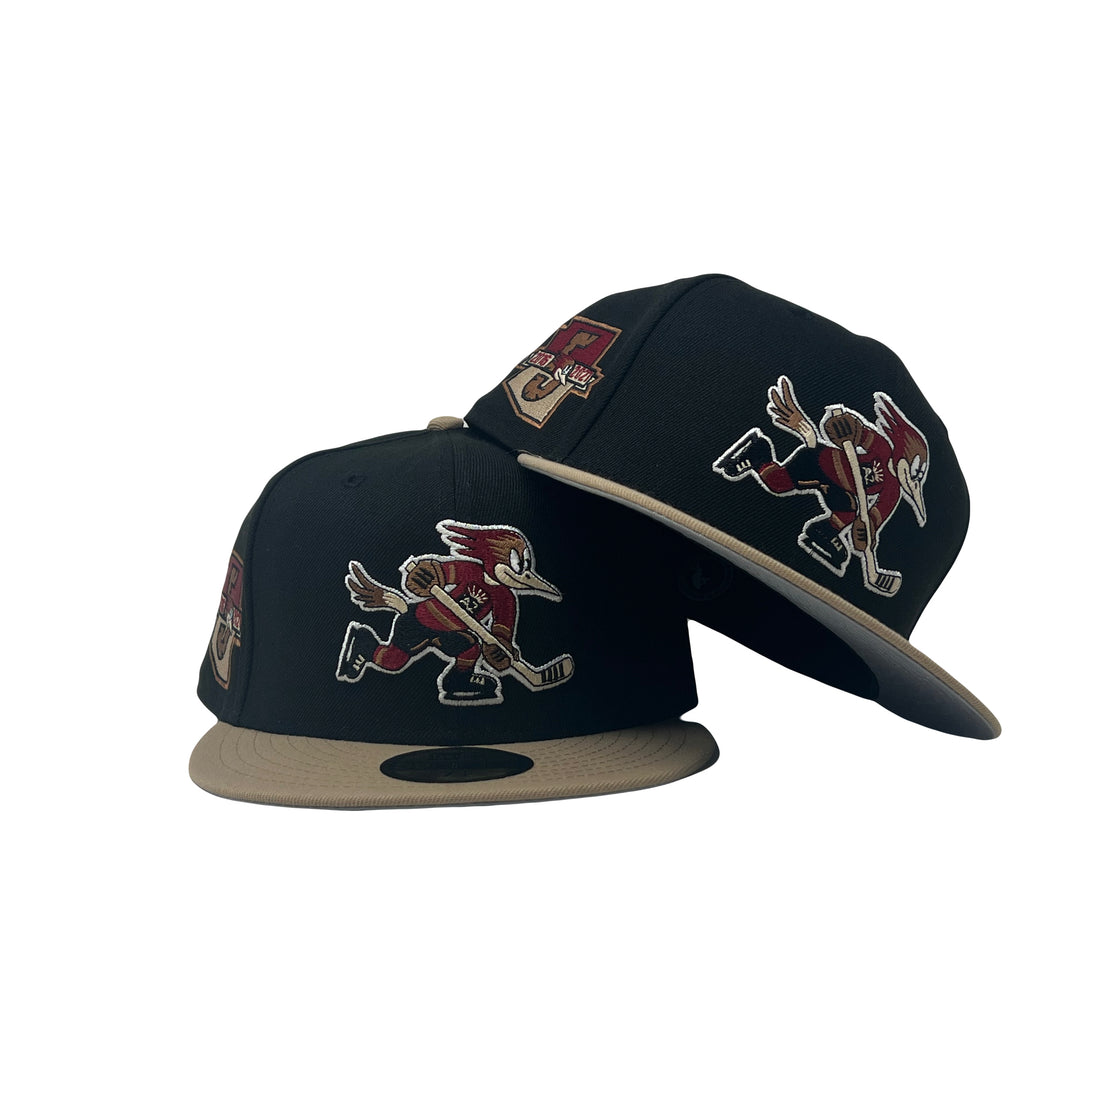 Tucson Roadrunners 5th Anniversary American Hockey League 5950 New Era Fitted Hat